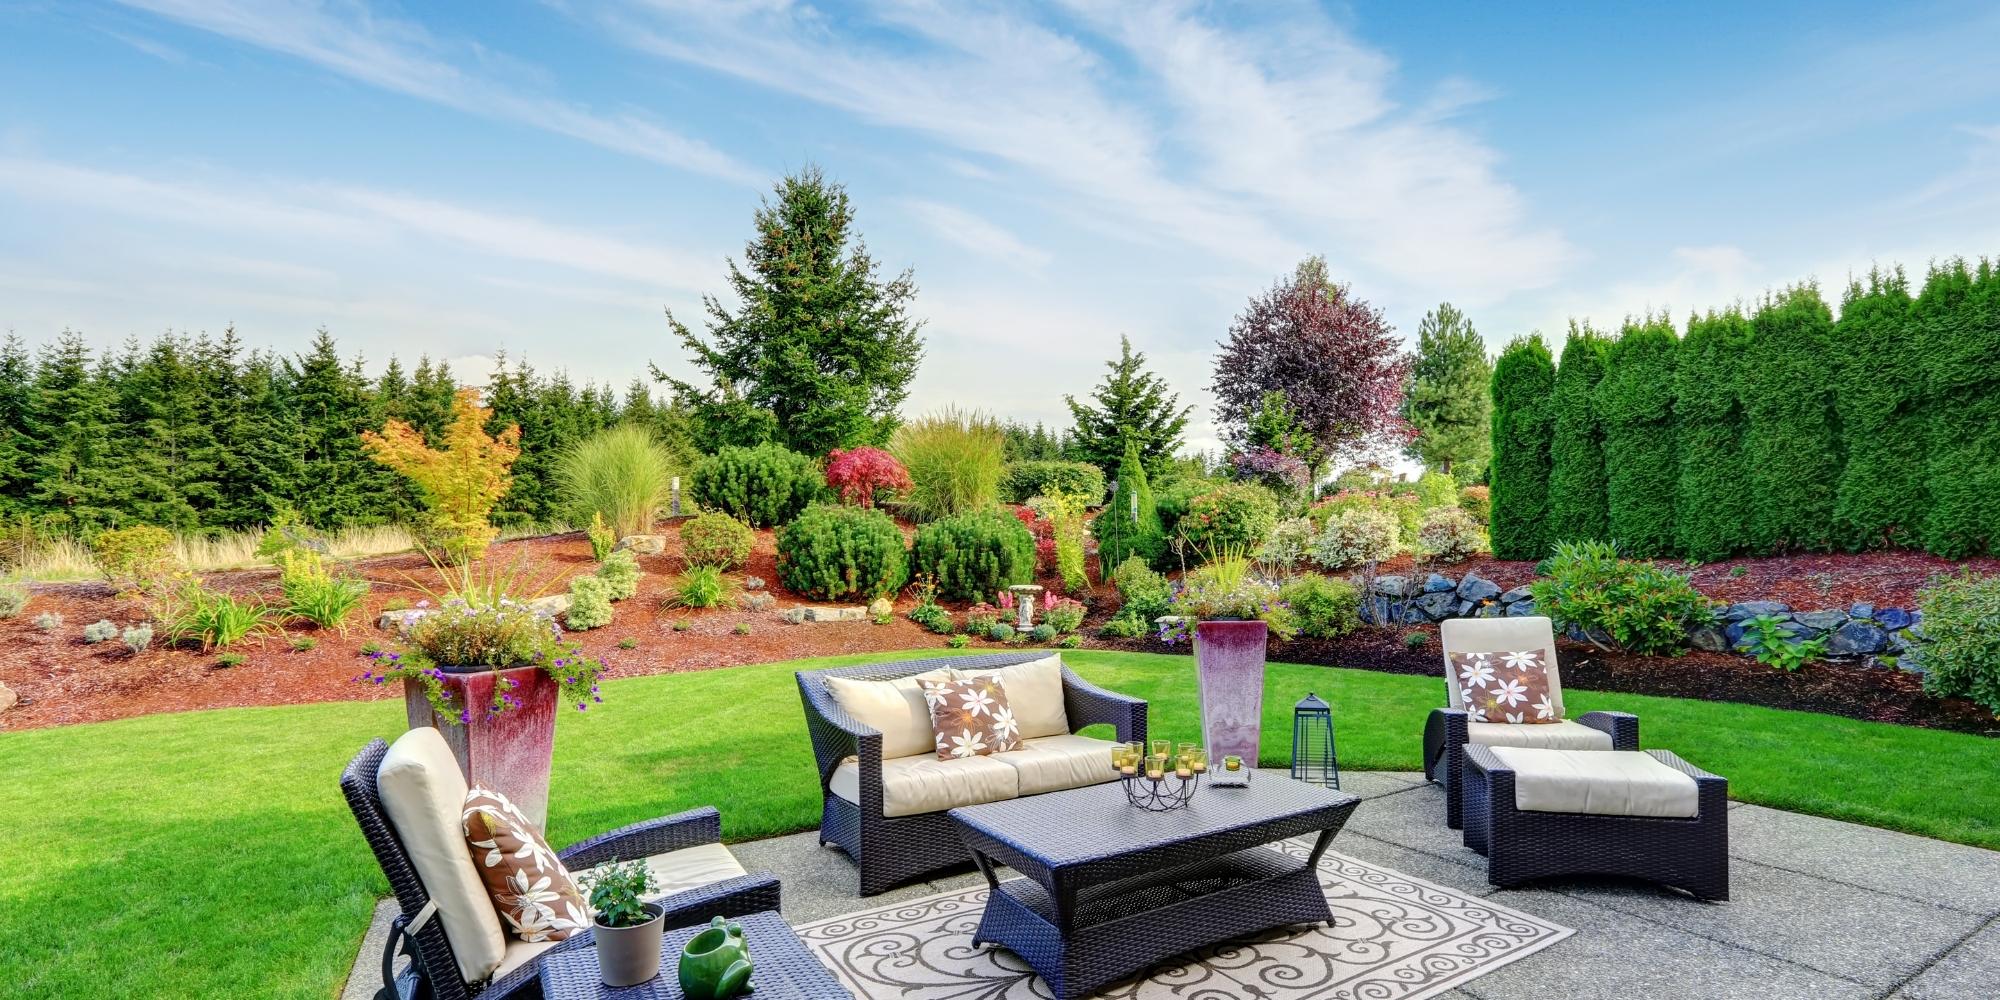 Time for outdoor renovation or a Perfect backyard remodel?